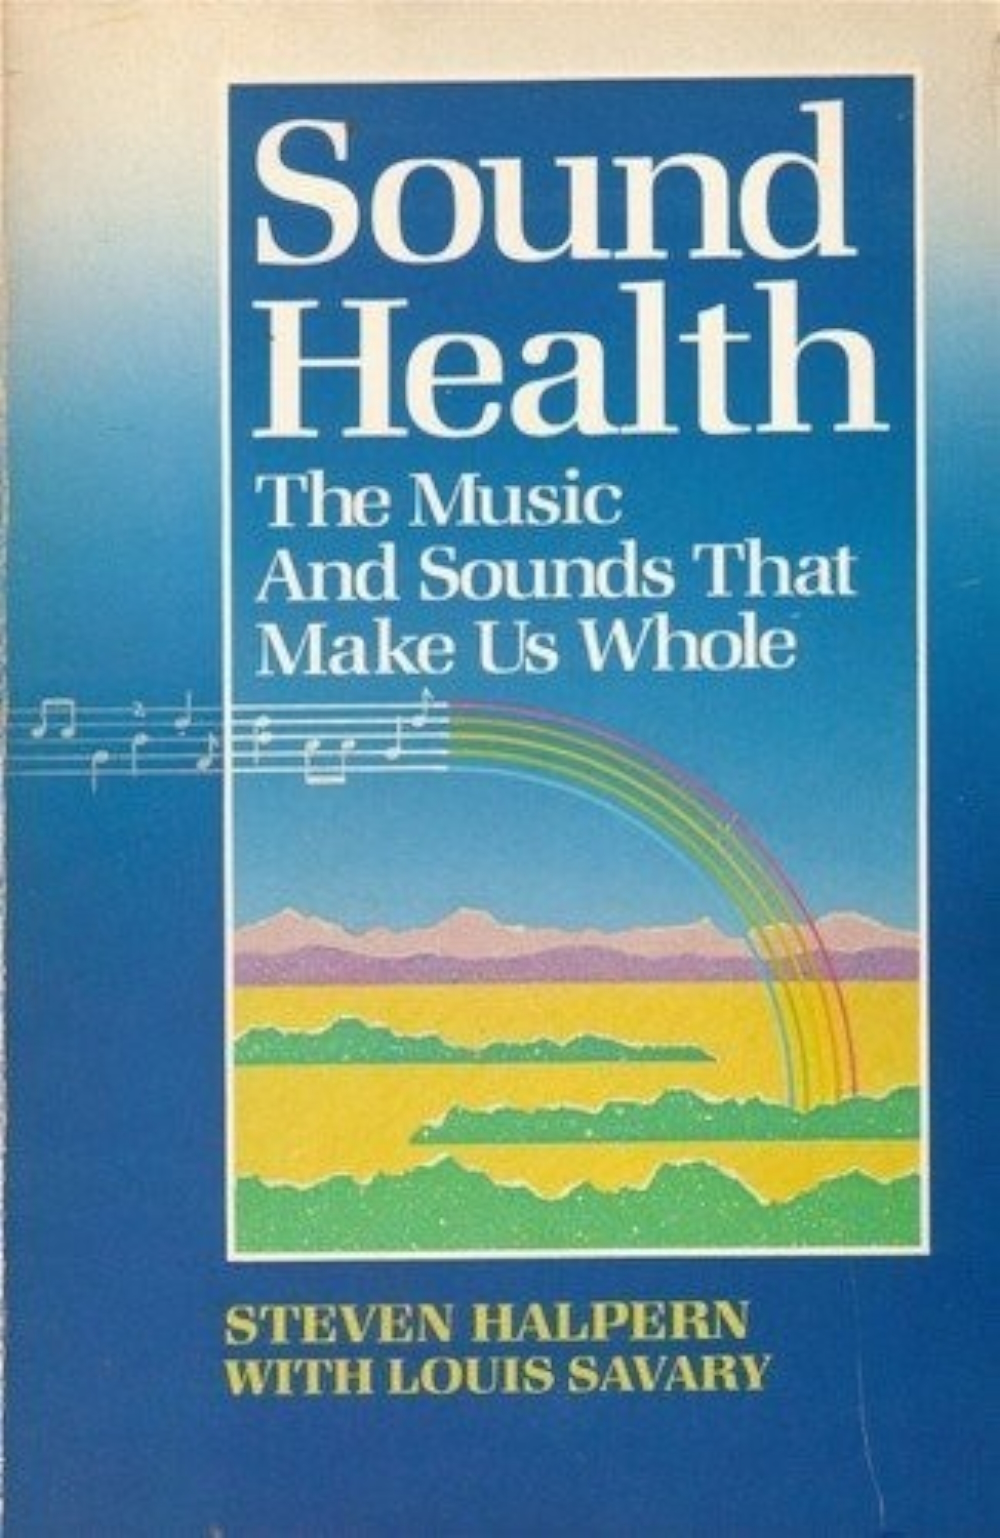 'Sound Health: the Music and Sounds that make us Whole': Steven Halpern's second book was published in 1985.